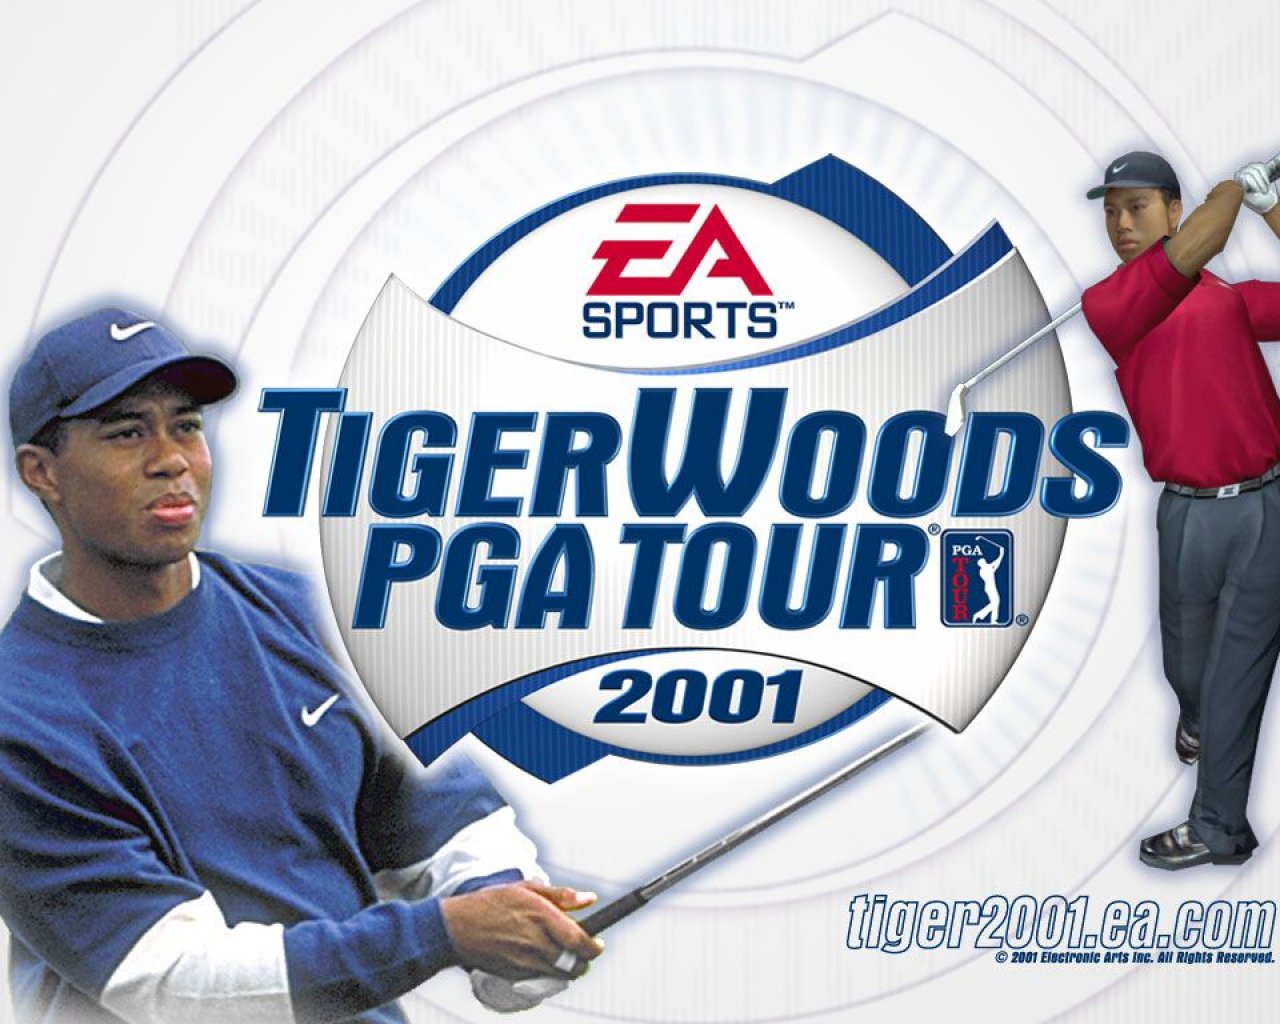 Tiger Woods Wallpapers - Download Tiger Woods Wallpapers - Tiger Woods 